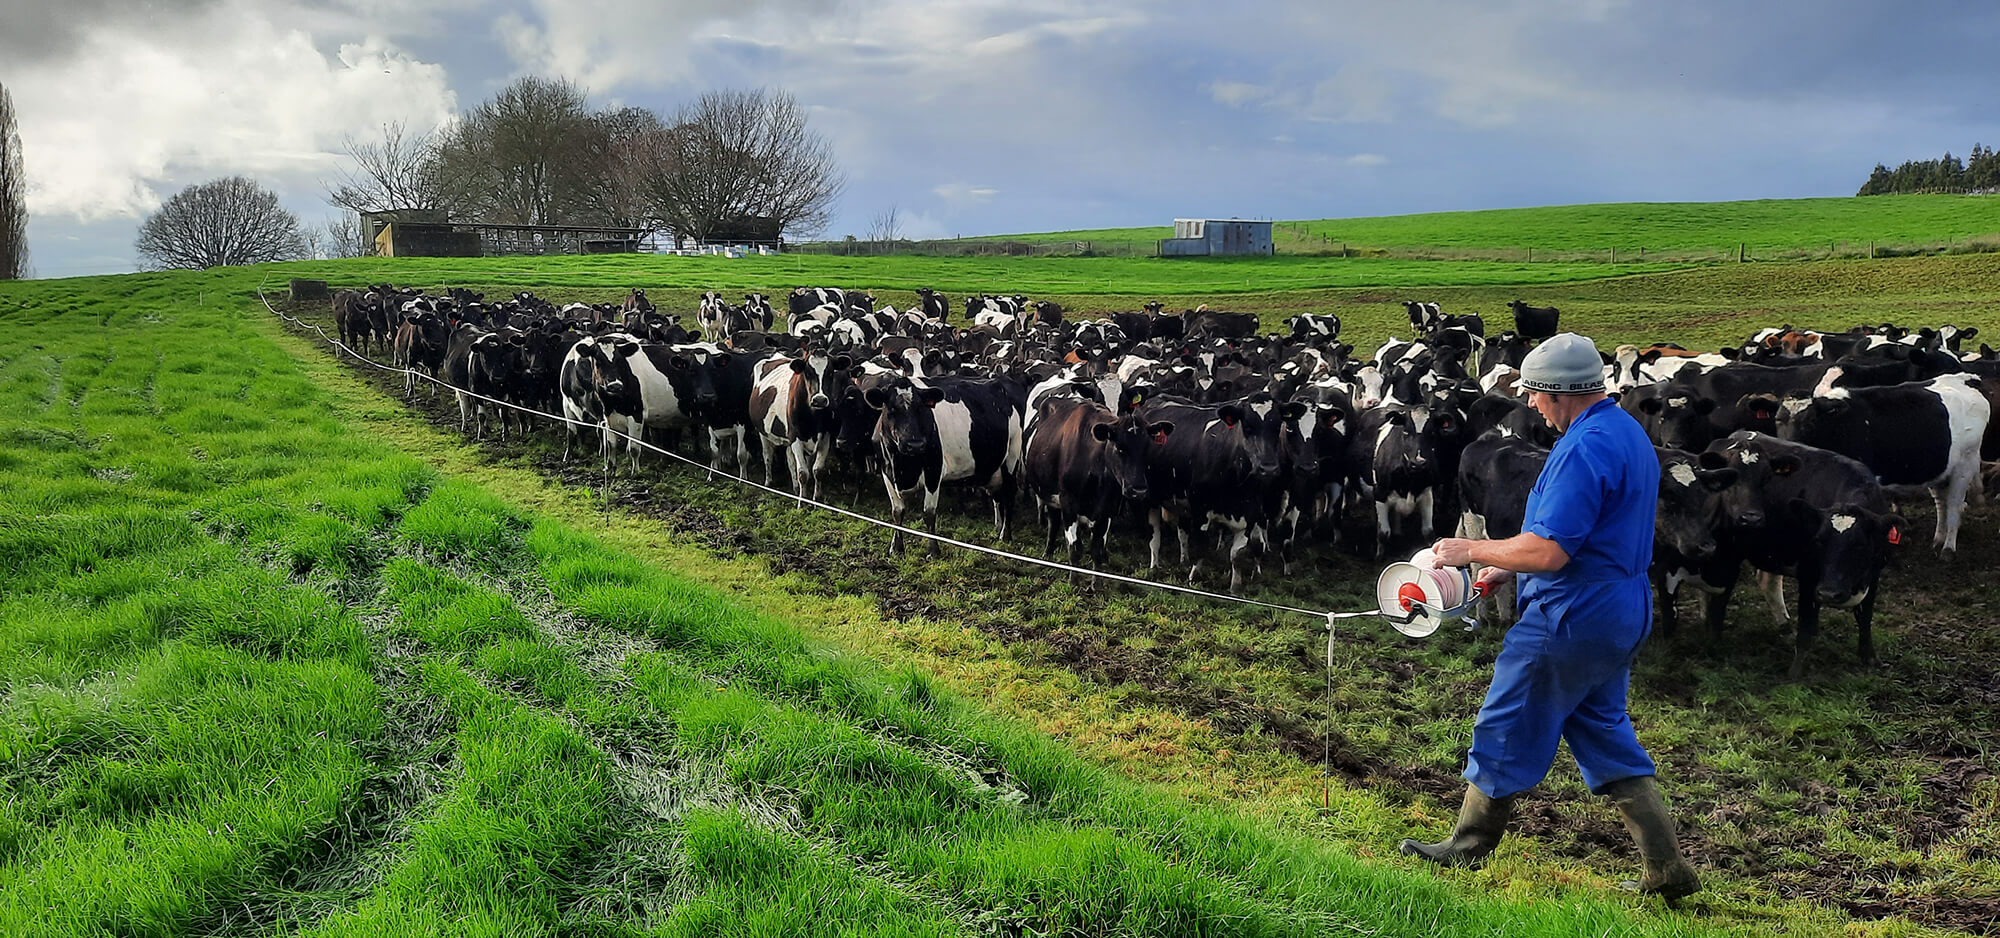 Ric Awburn on his farm with cows and Springarm in the troughs